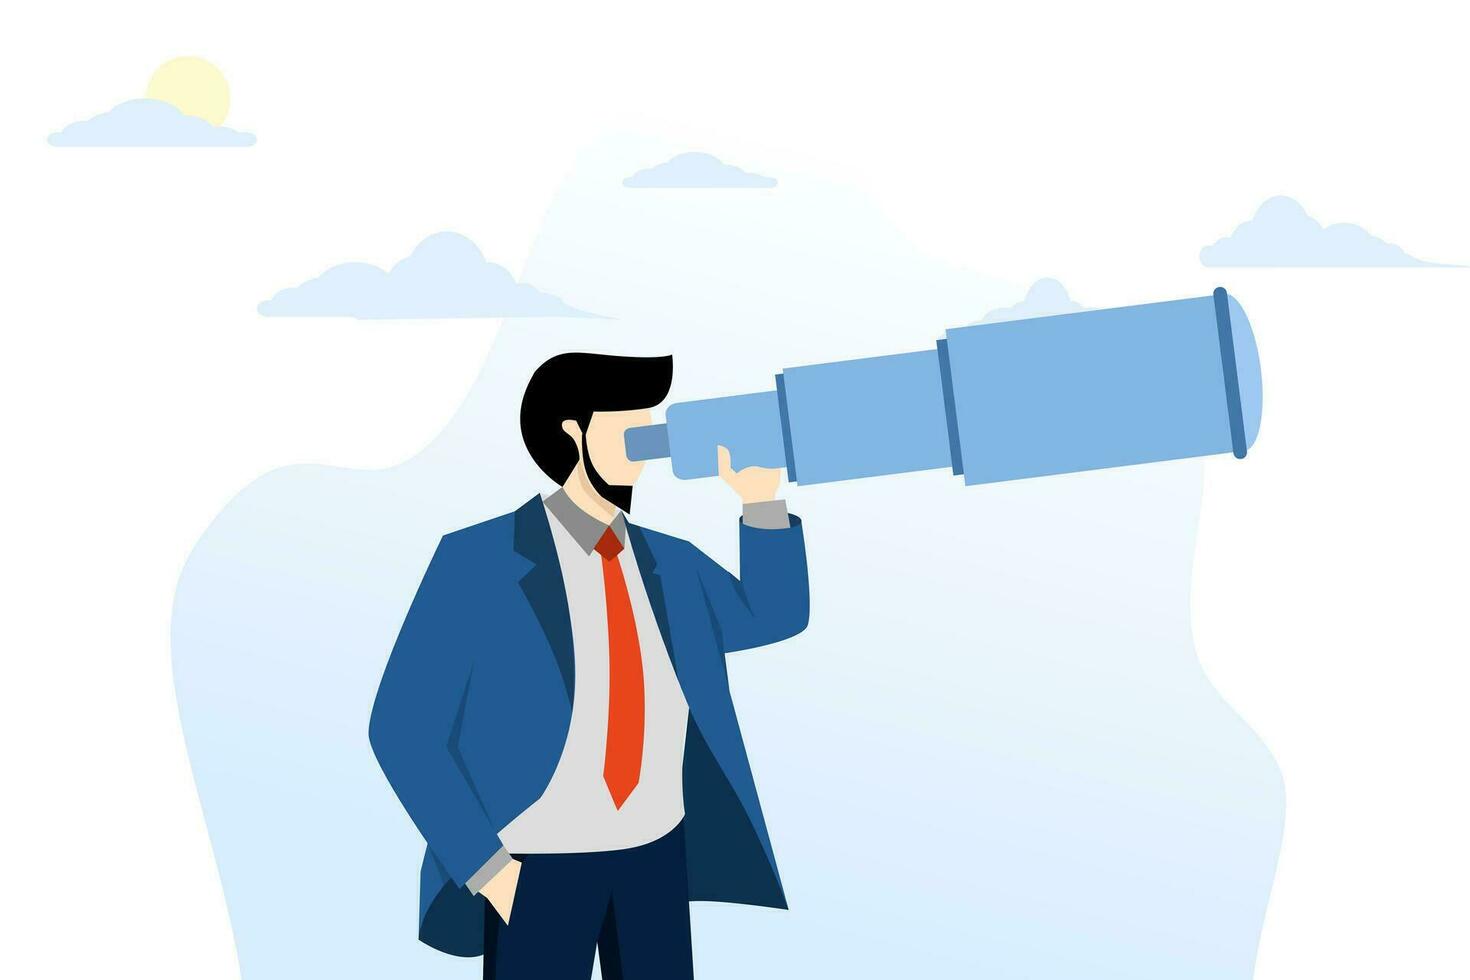 concept of looking for opportunity, business vision, direction of success or finding new employees, career future, invention or research, businessman looking through telescope or binoculars. vector